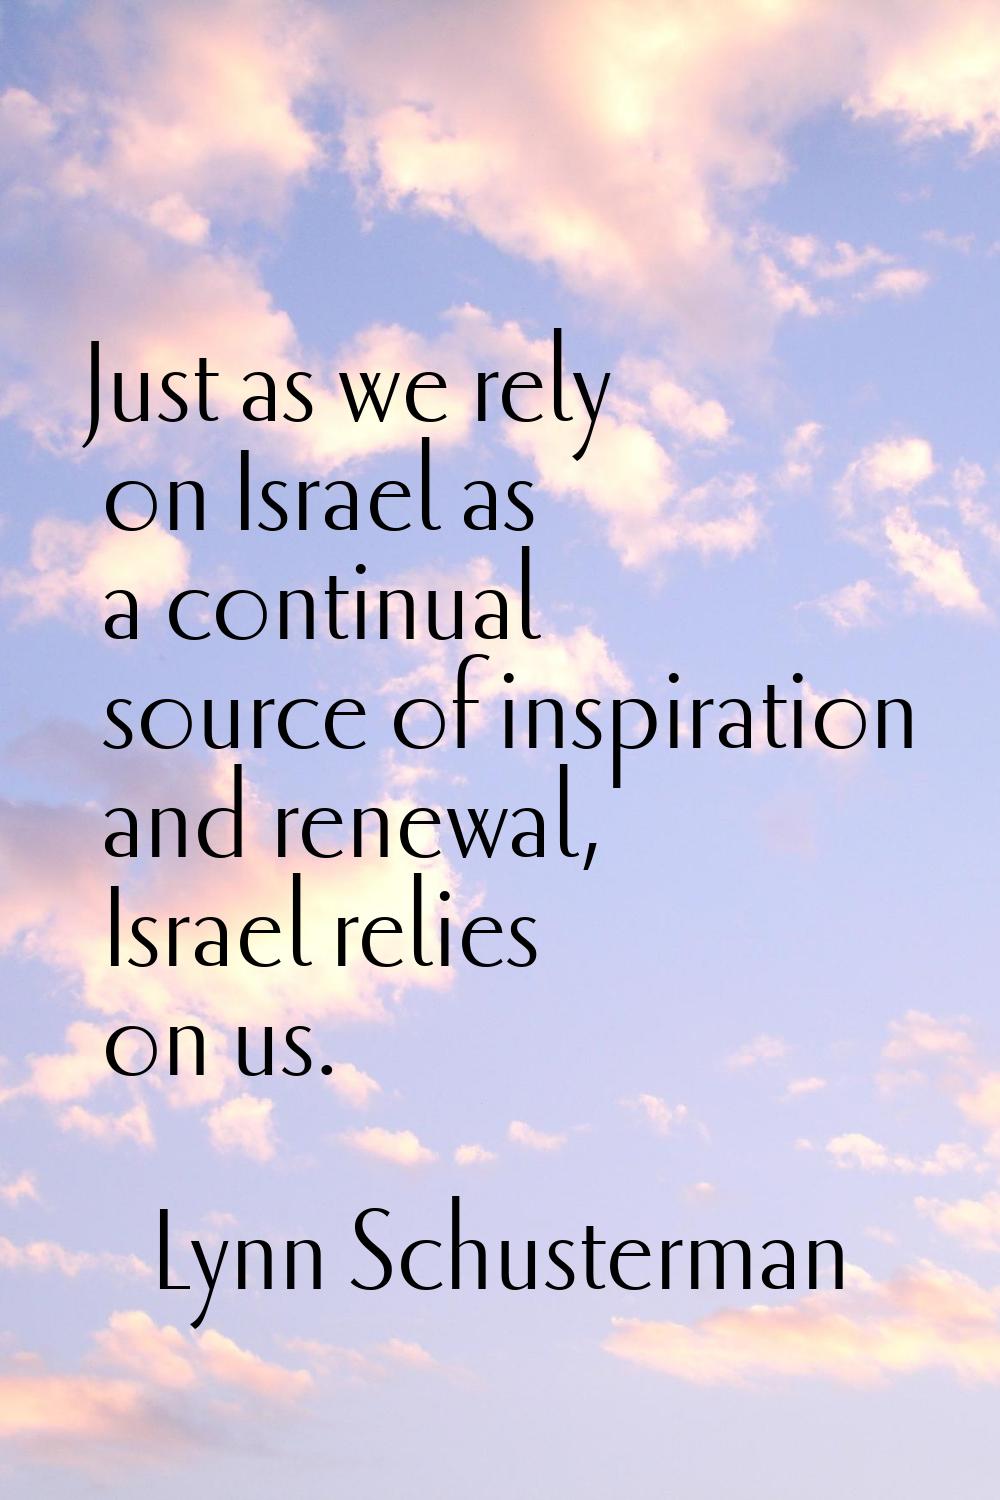 Just as we rely on Israel as a continual source of inspiration and renewal, Israel relies on us.